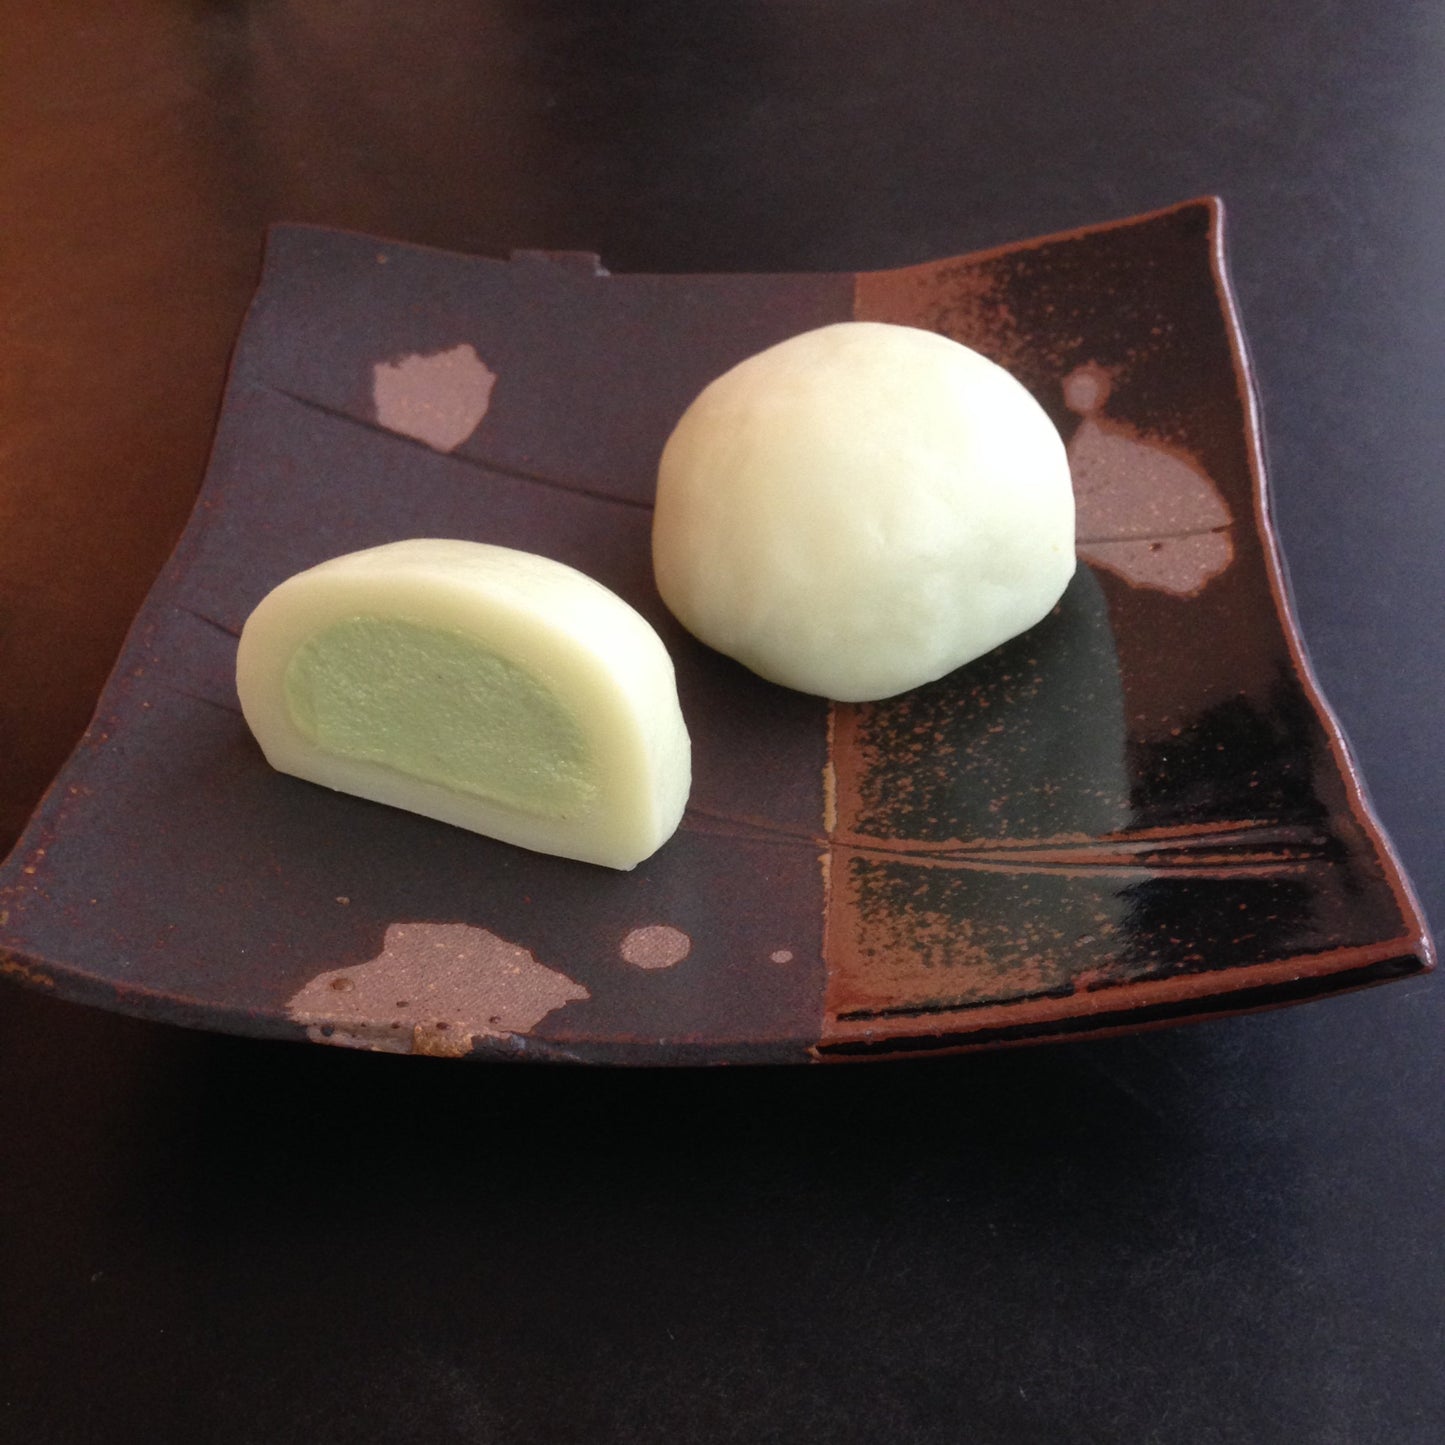 Mochi only for pick-up at our tearoom